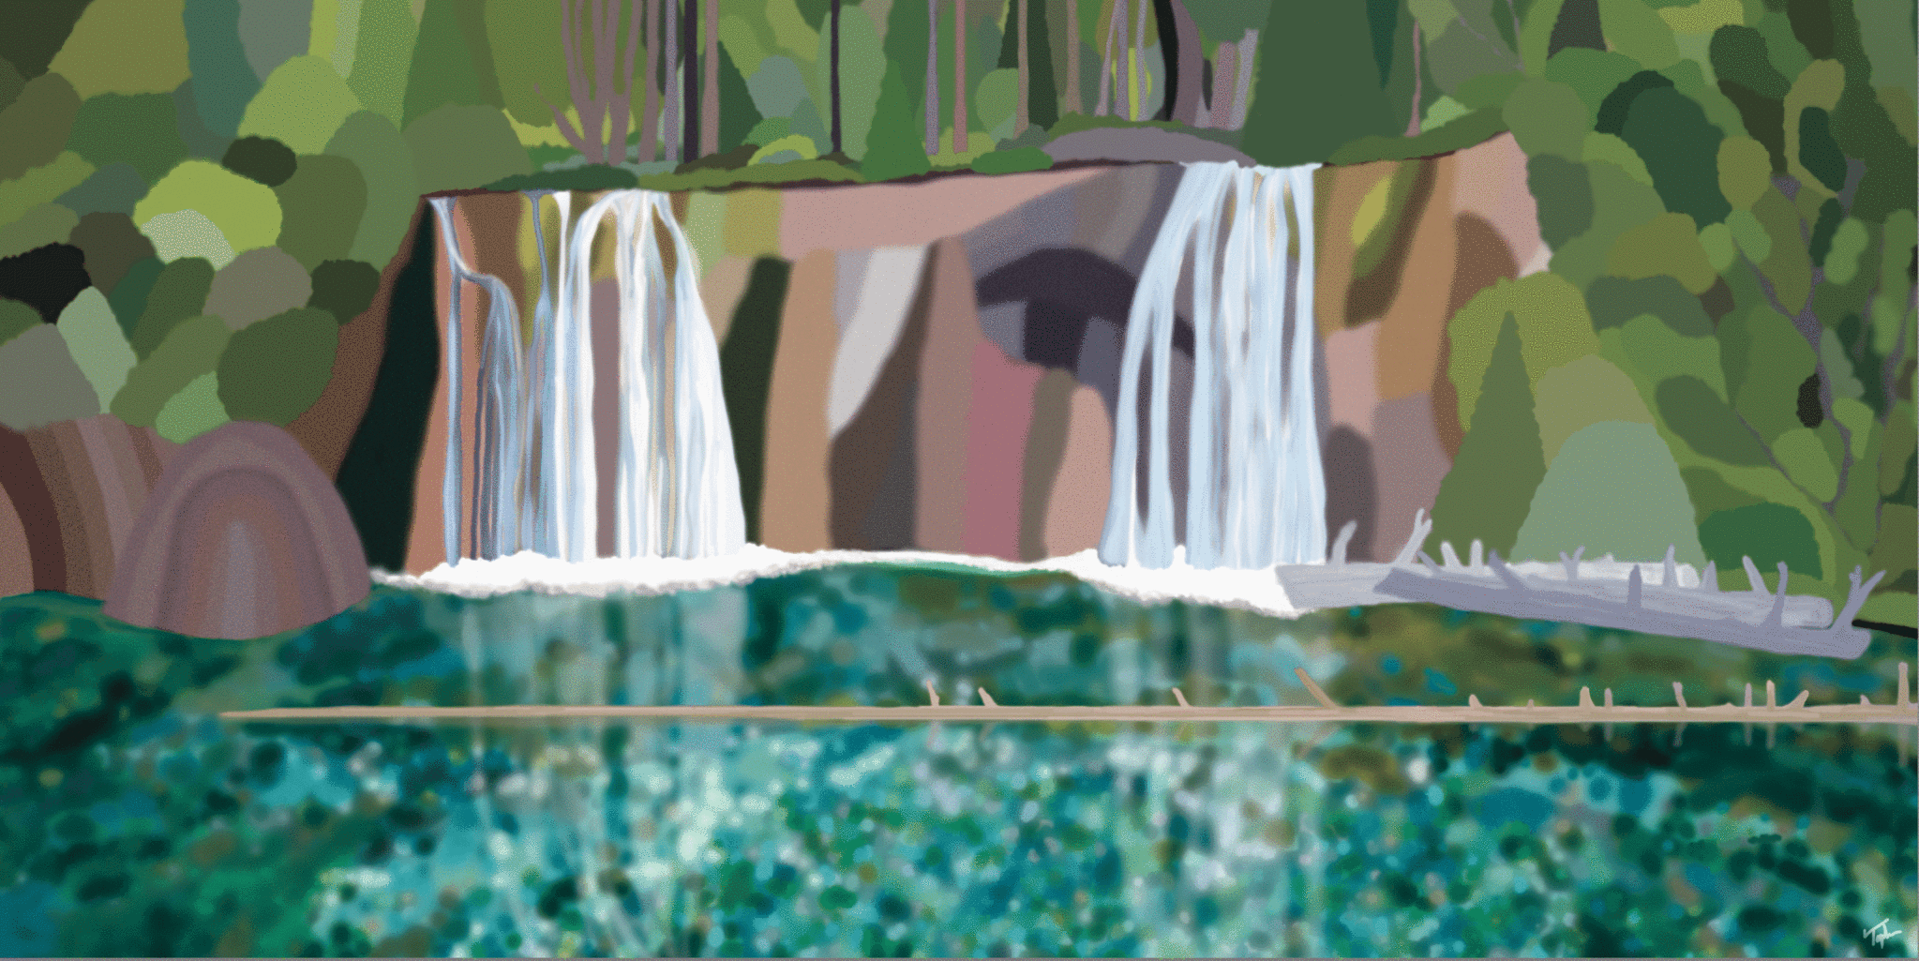 Hanging Lake (on display at The Hythe, Vail) by Topher Straus